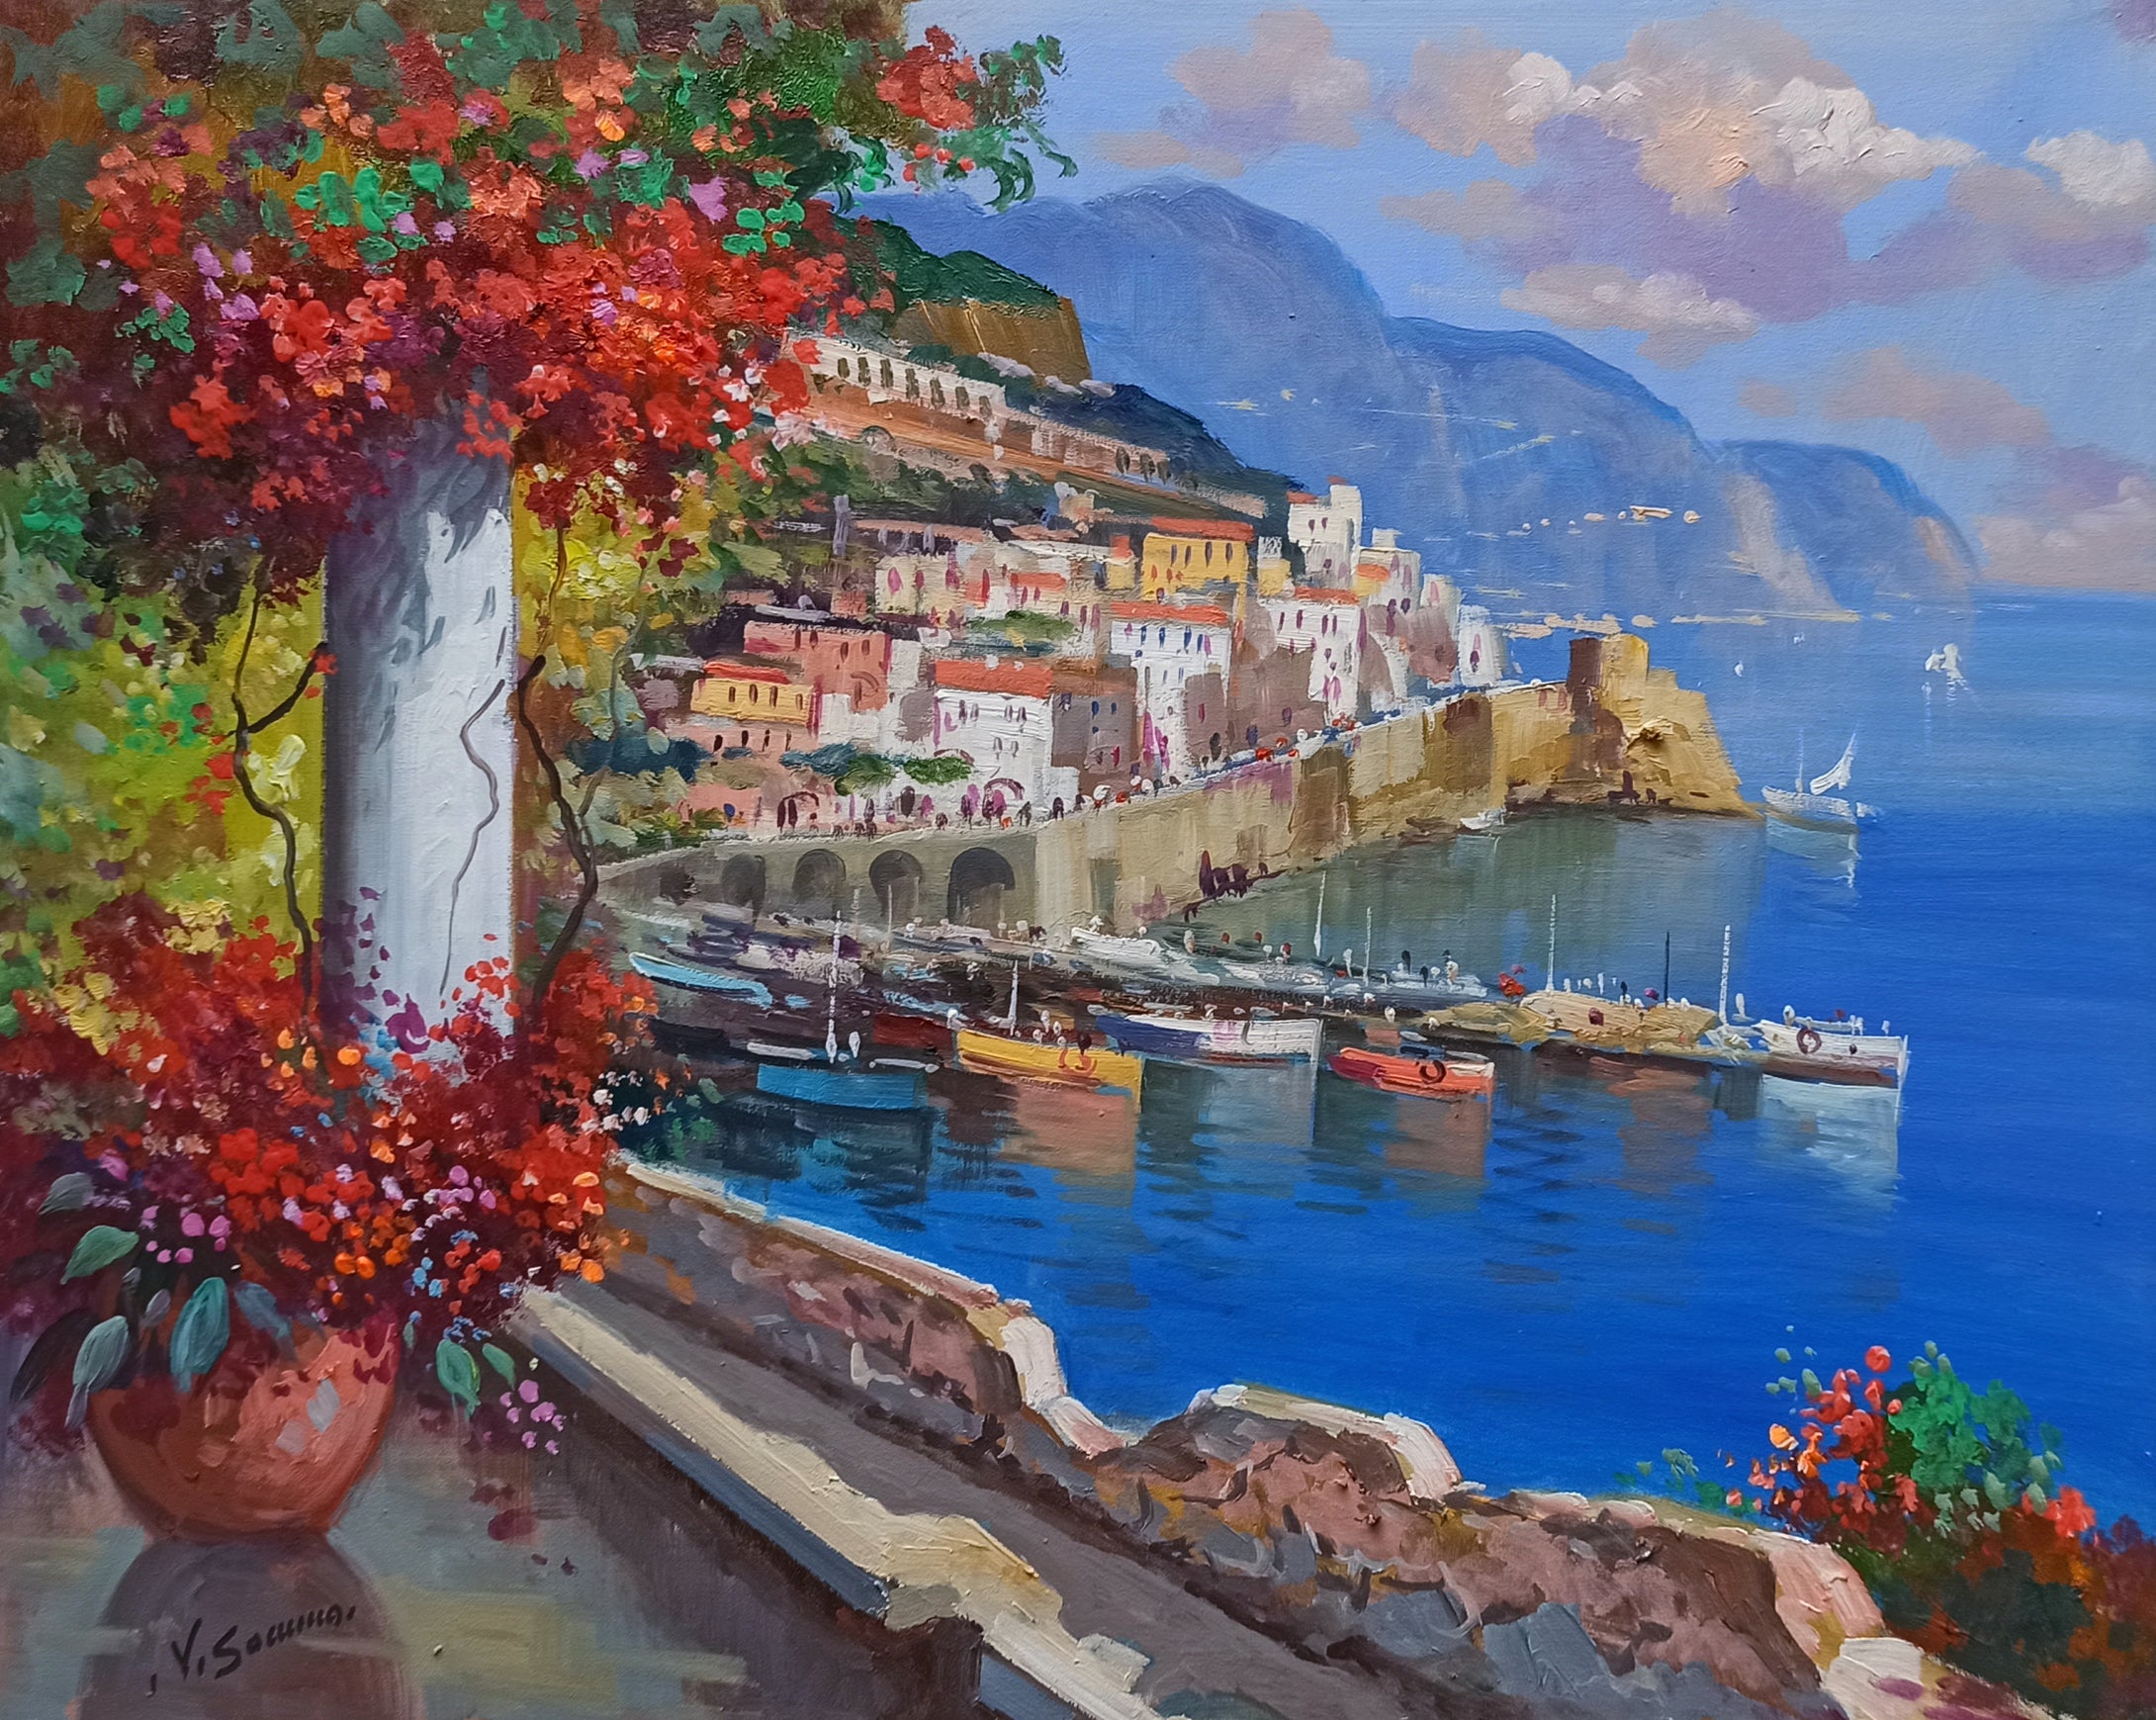 Amalfi painting by Vincenzo Somma 